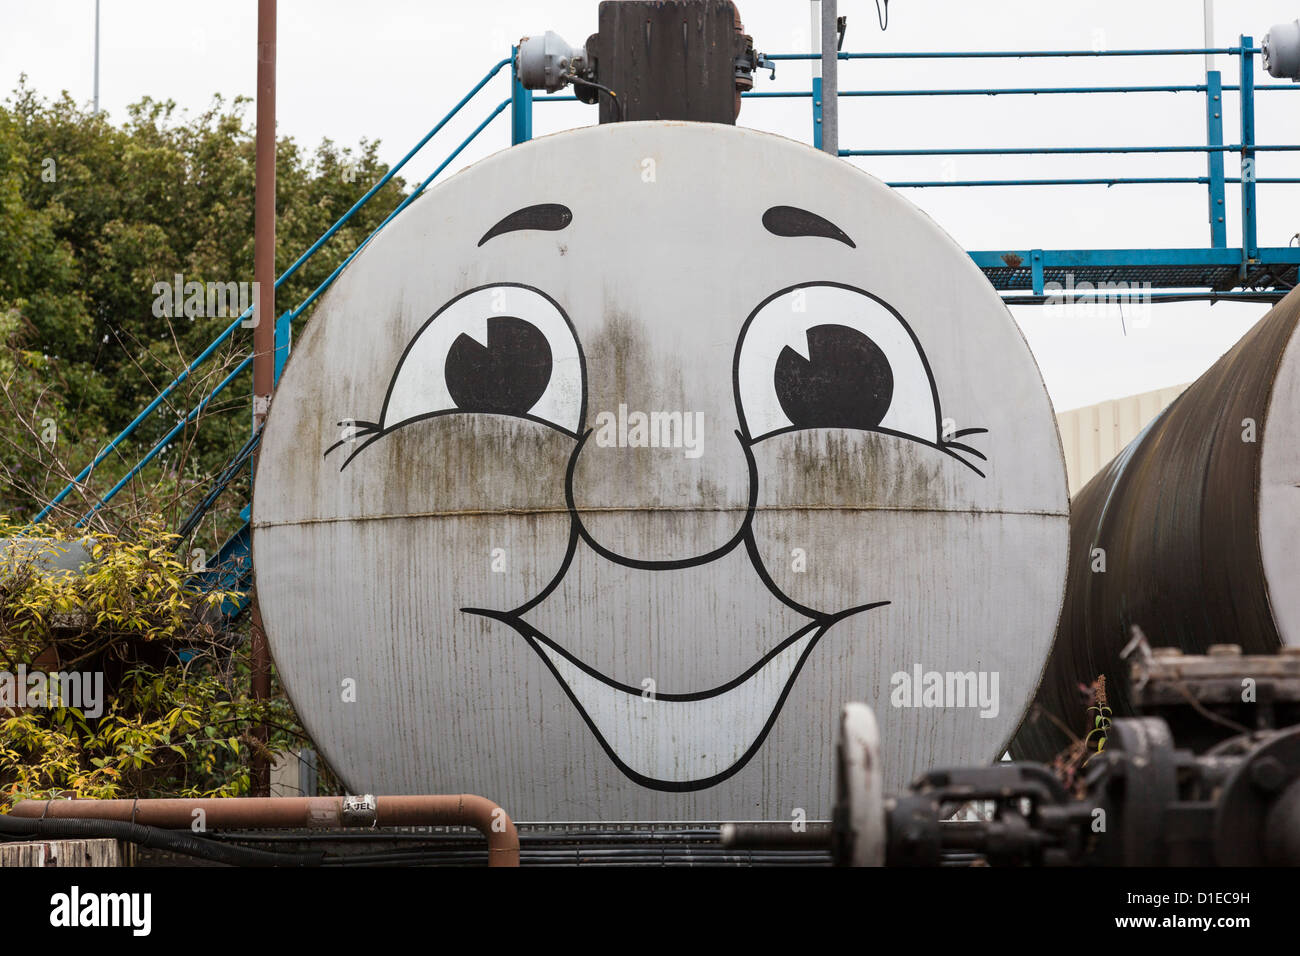 Storage tank with amusing 'Thomas the Tank Engine' face painted on it. Stock Photo